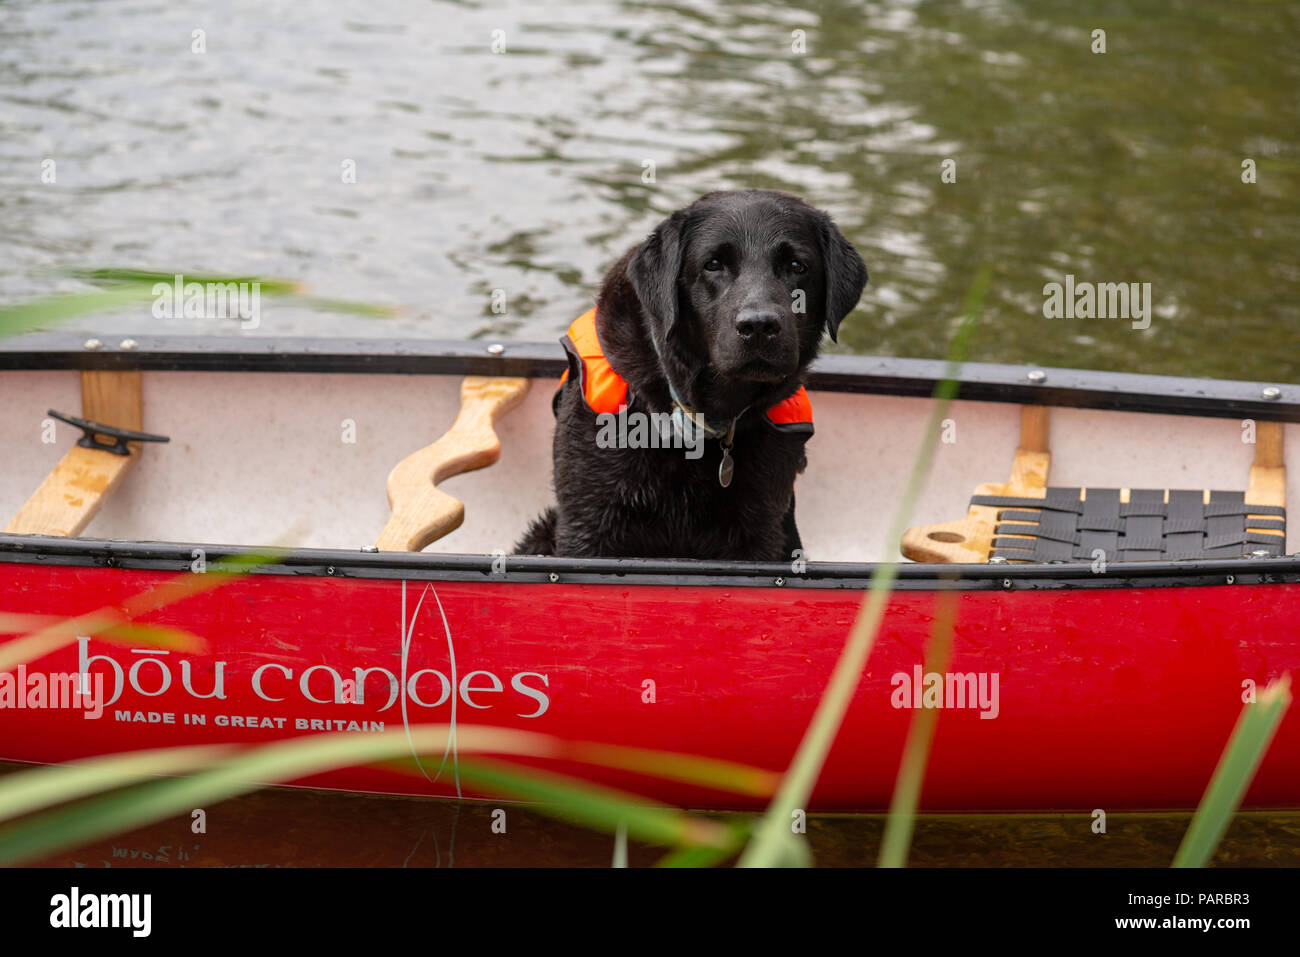 Black Labrador dog in a canoe on a river and wearing an orange life jacket. Stock Photo